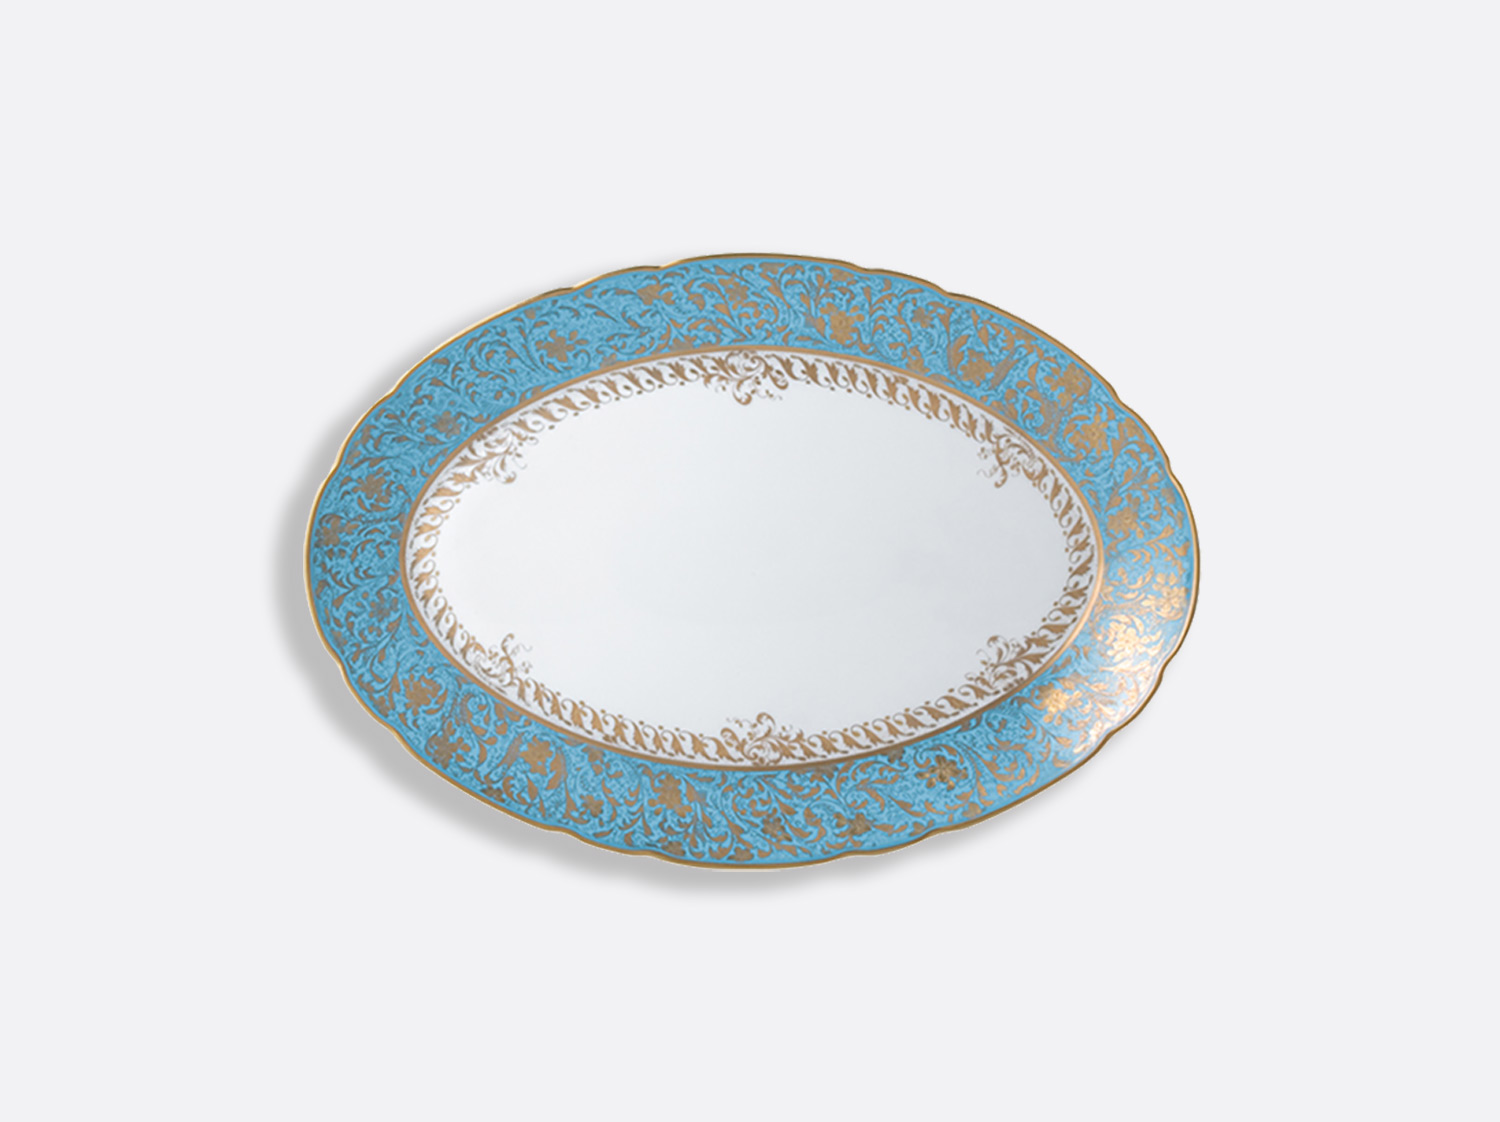 China Oval platter 13" of the collection Eden turquoise | Bernardaud